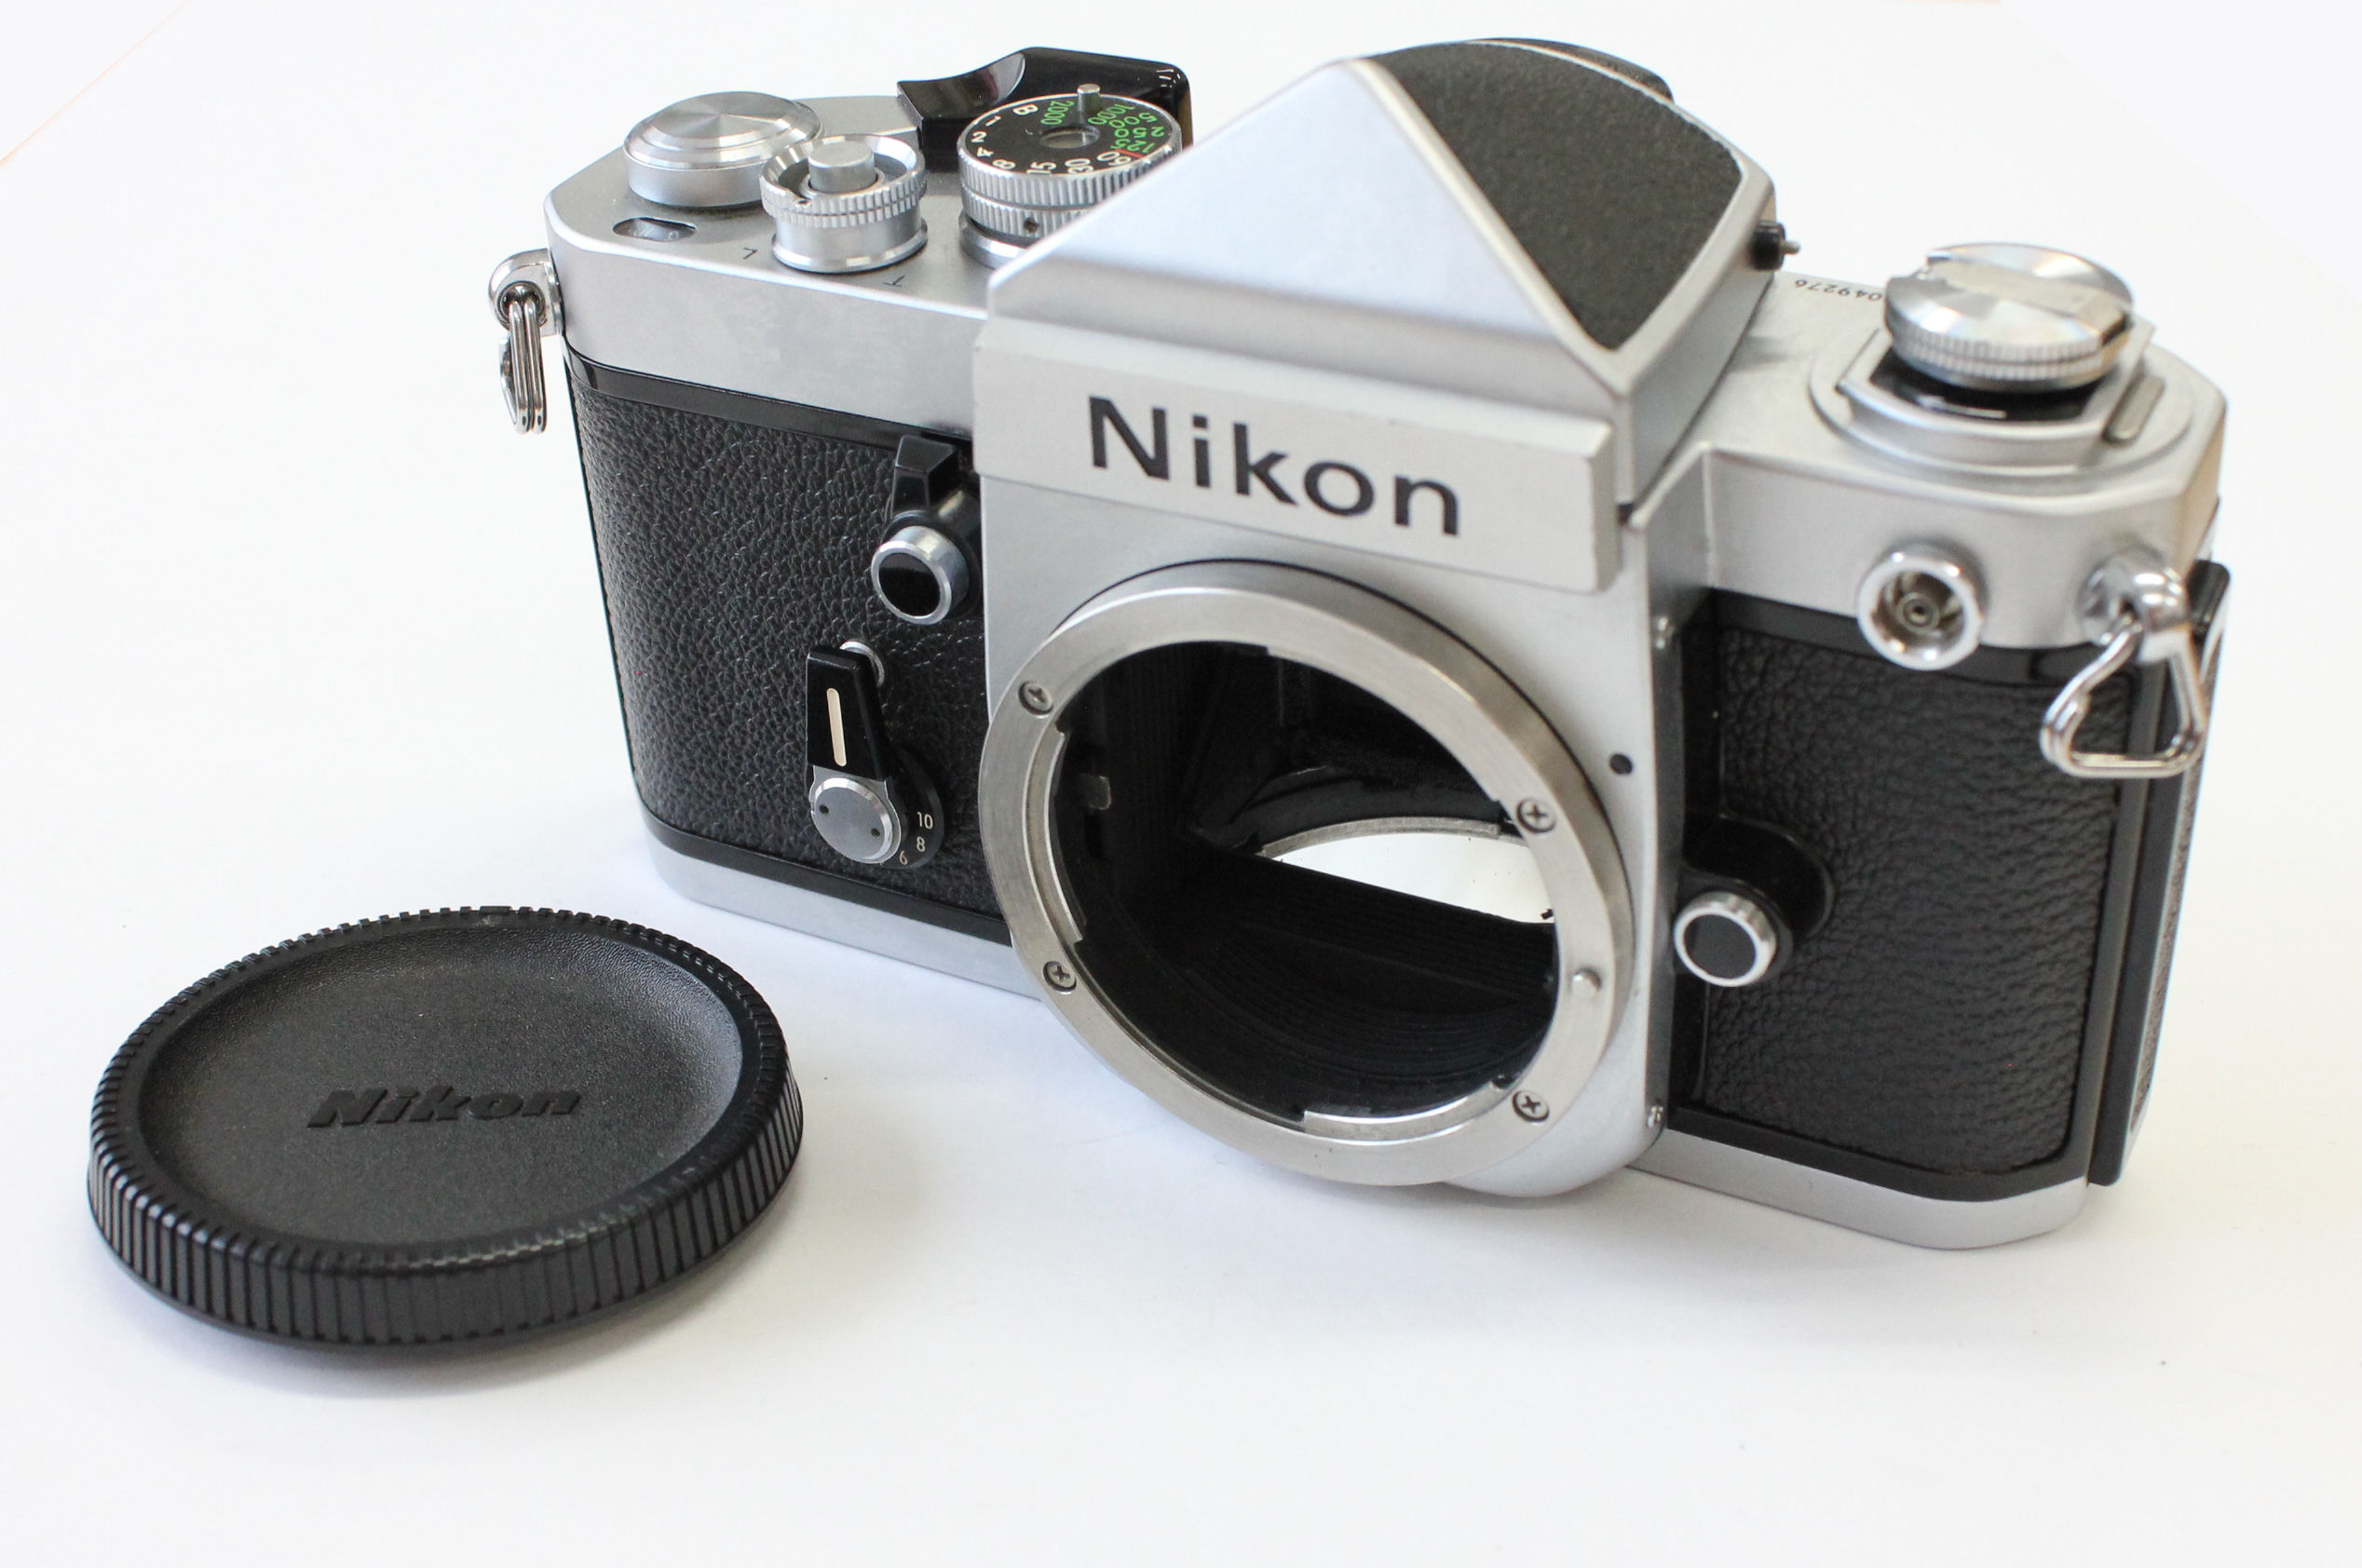 [Excellent+++]Nikon f2 Eye Level 35mm SLR Film Camera with DE-1 View Finder from Japan